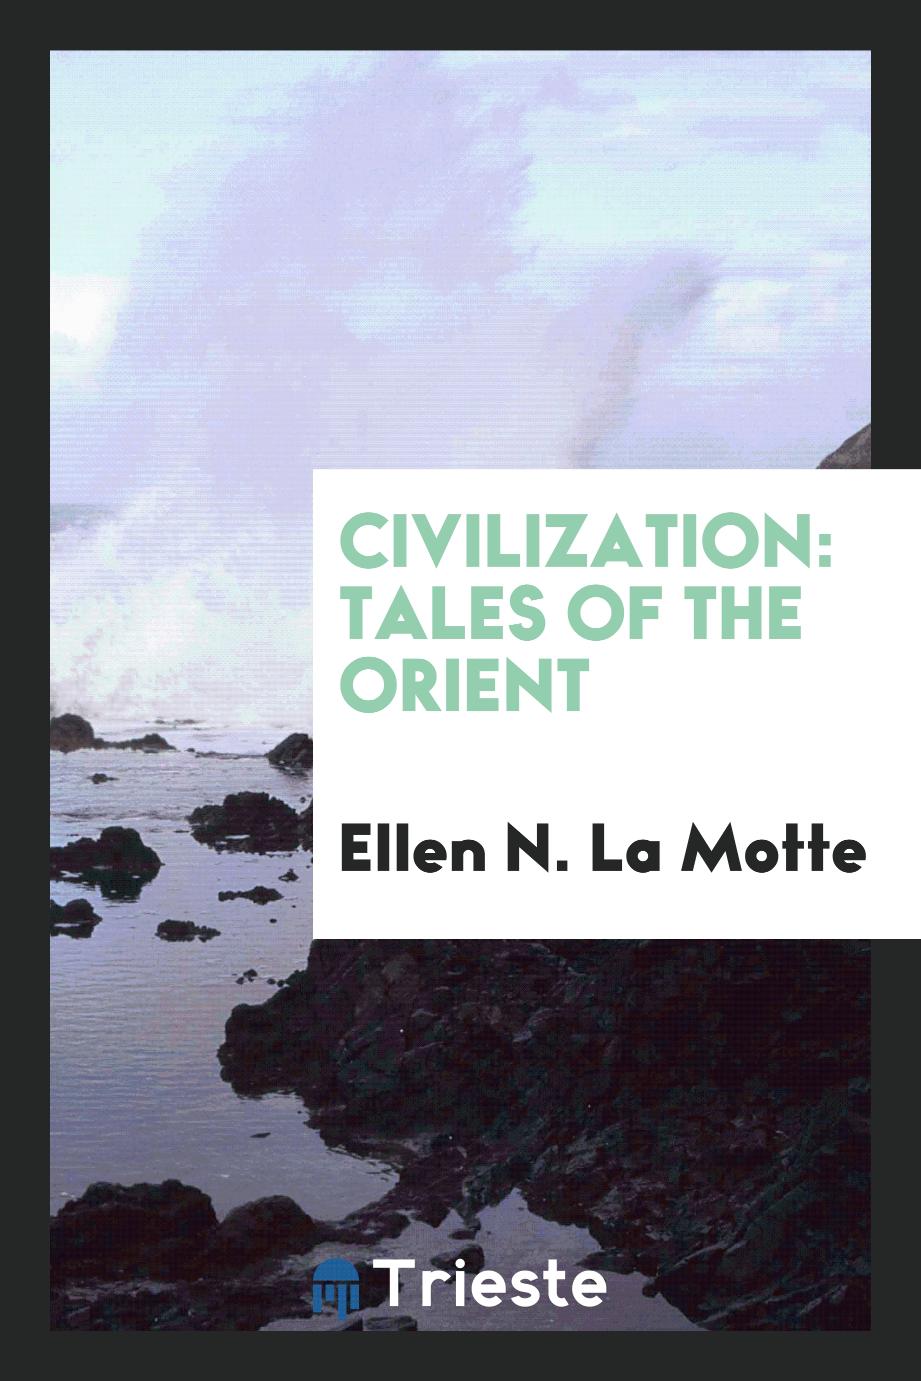 Civilization: tales of the Orient